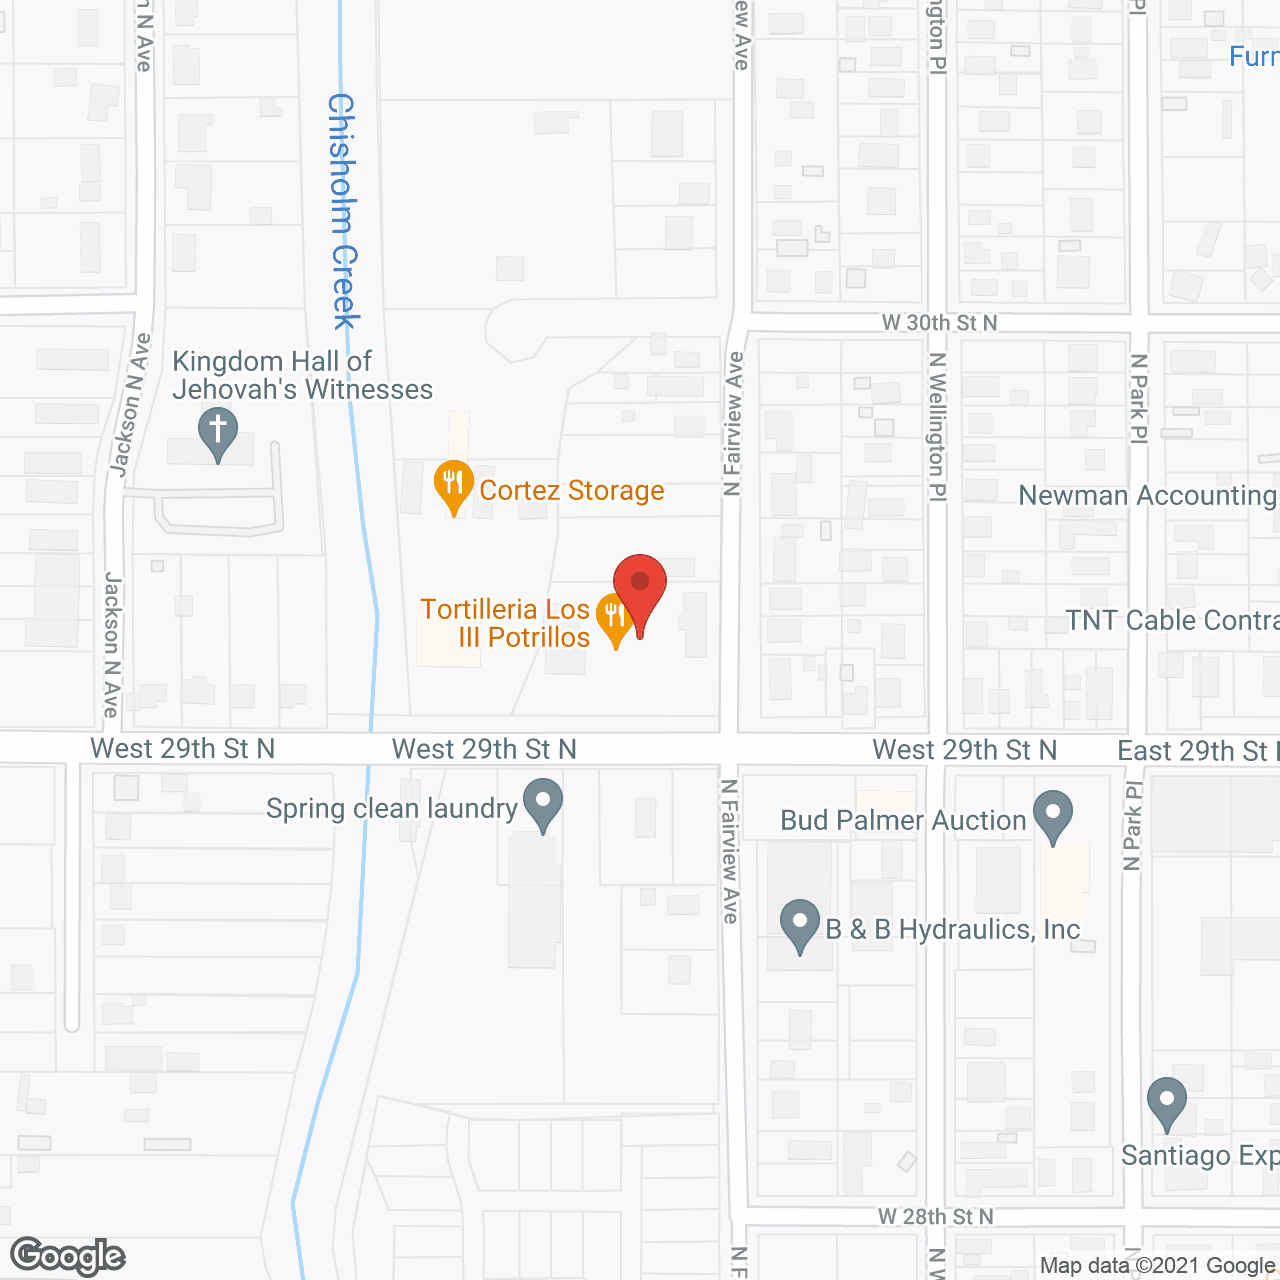 Fairview Residential Care Ctr in google map